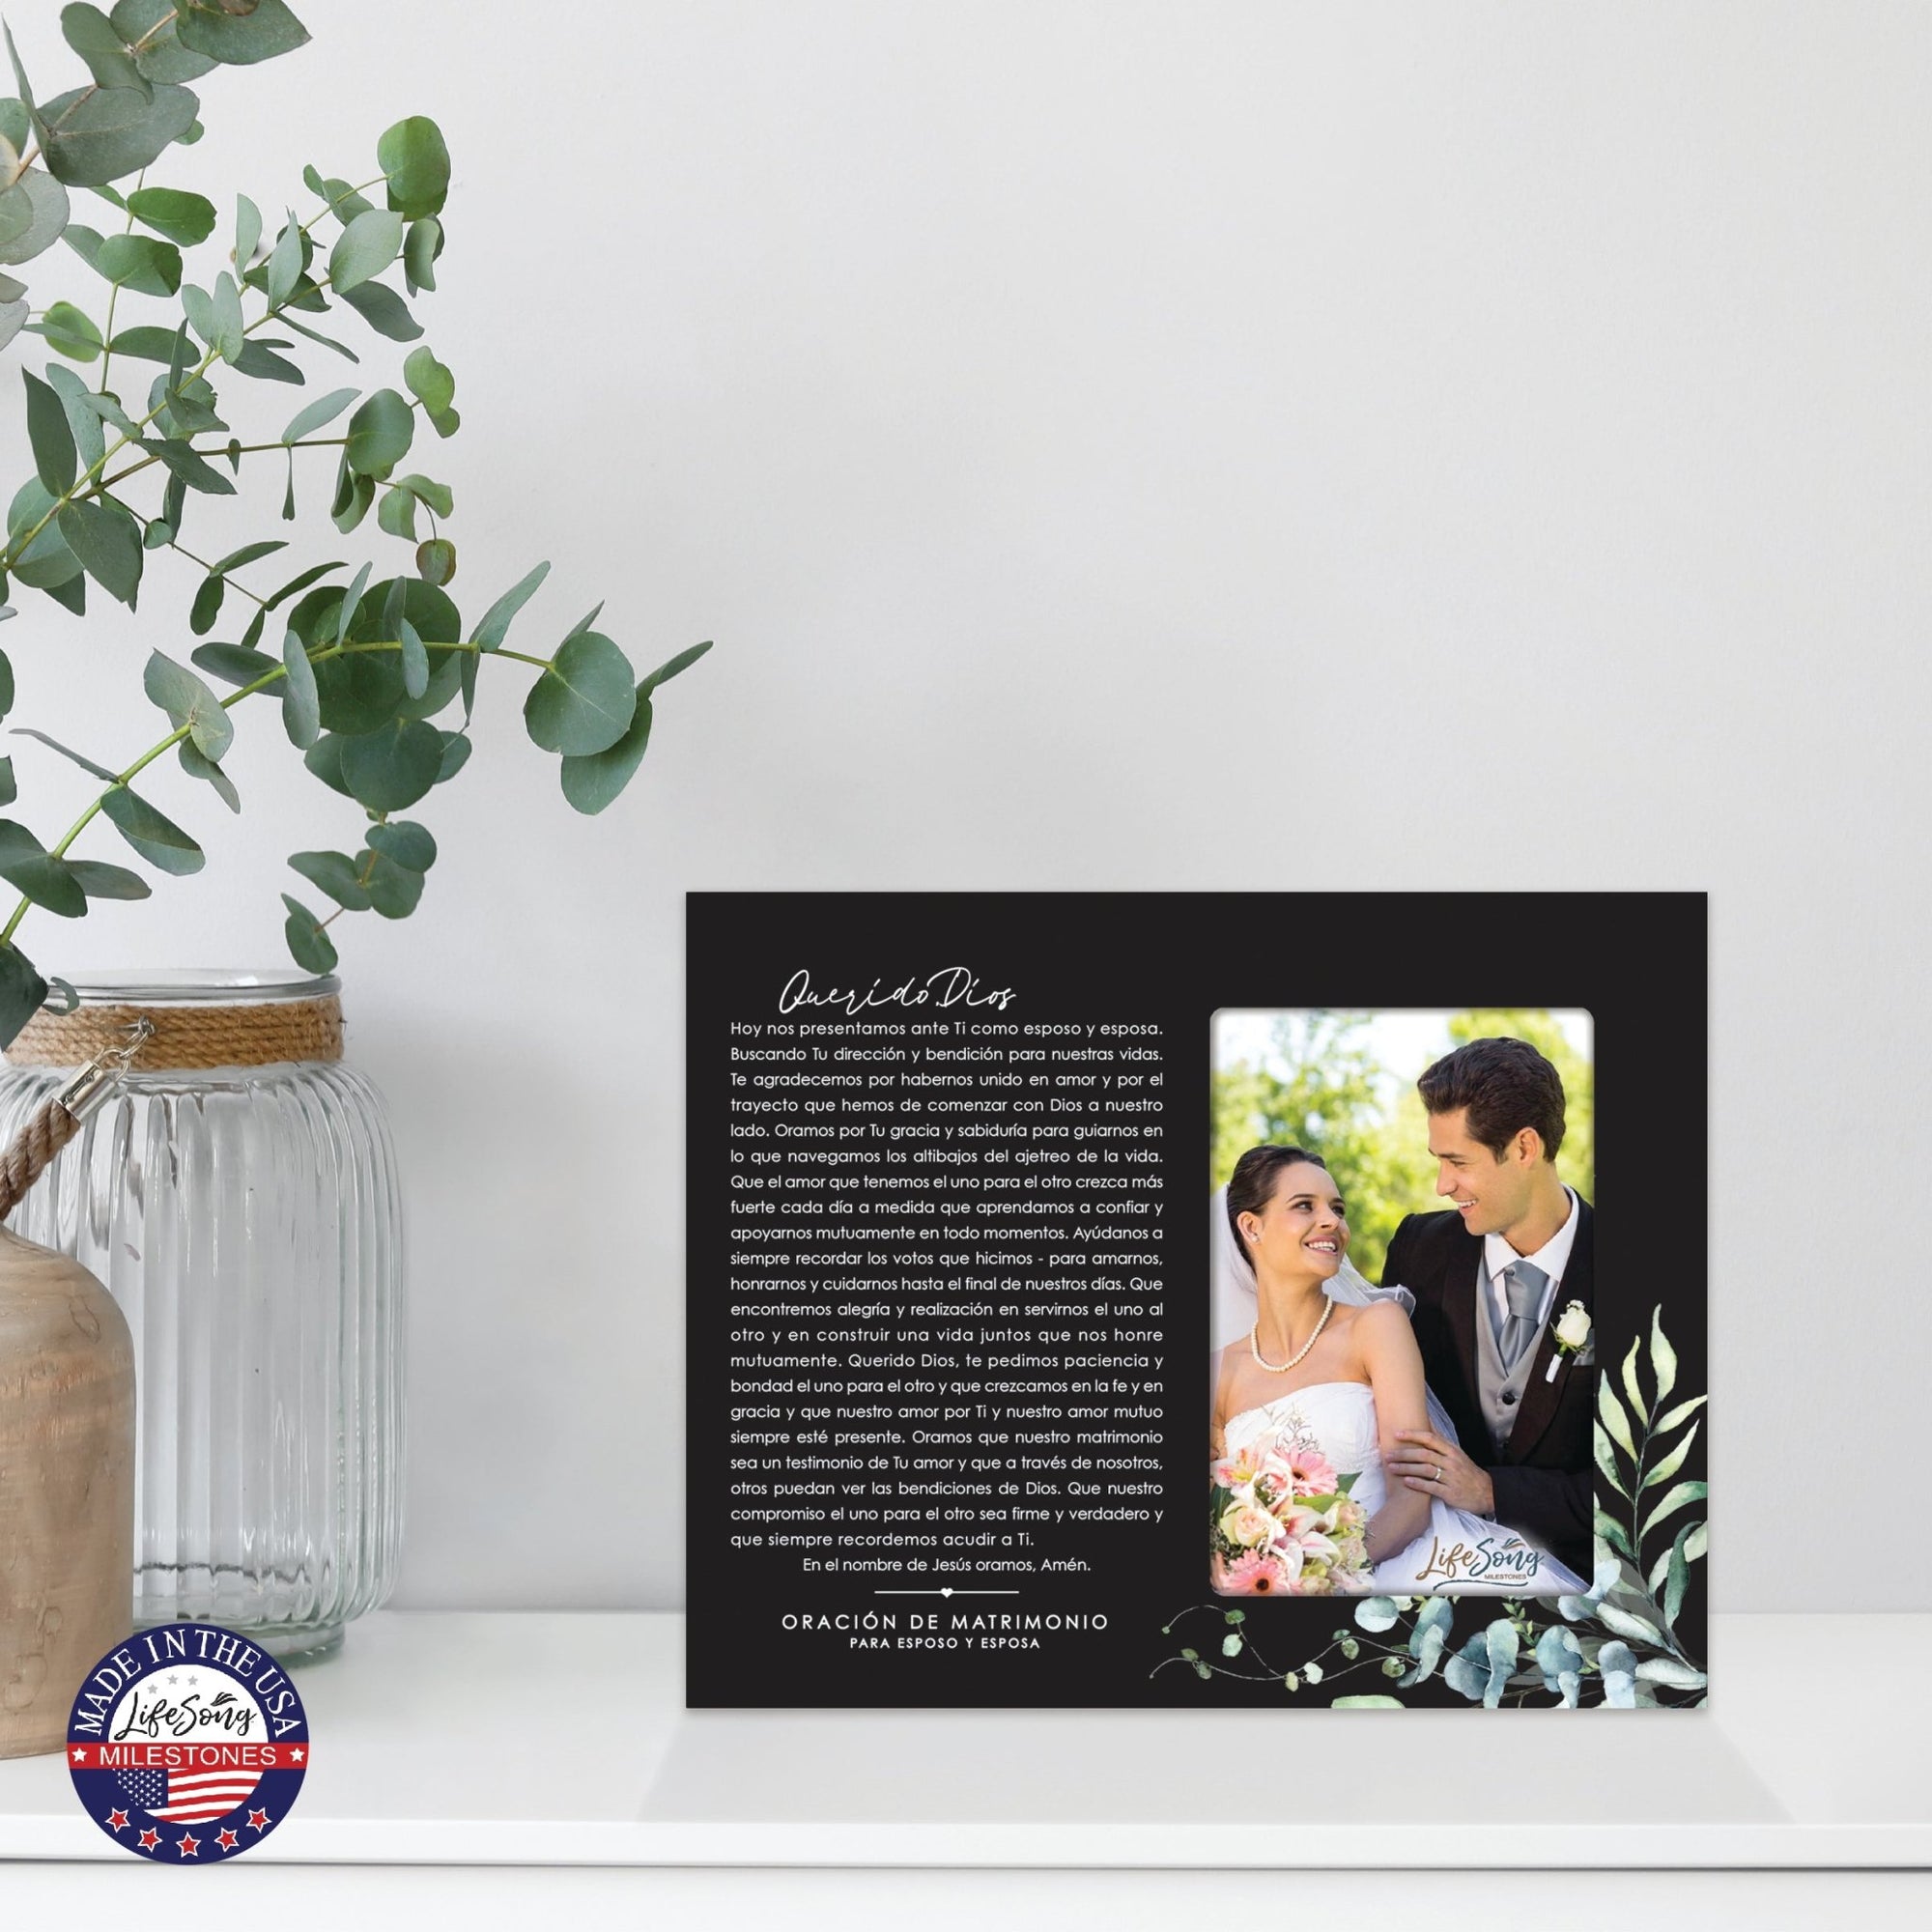 Marriage Prayer Wedding Anniversary Gifts for Couples Spanish Wooden Wall And Tabletop Photo Frame - Querido Dios - LifeSong Milestones